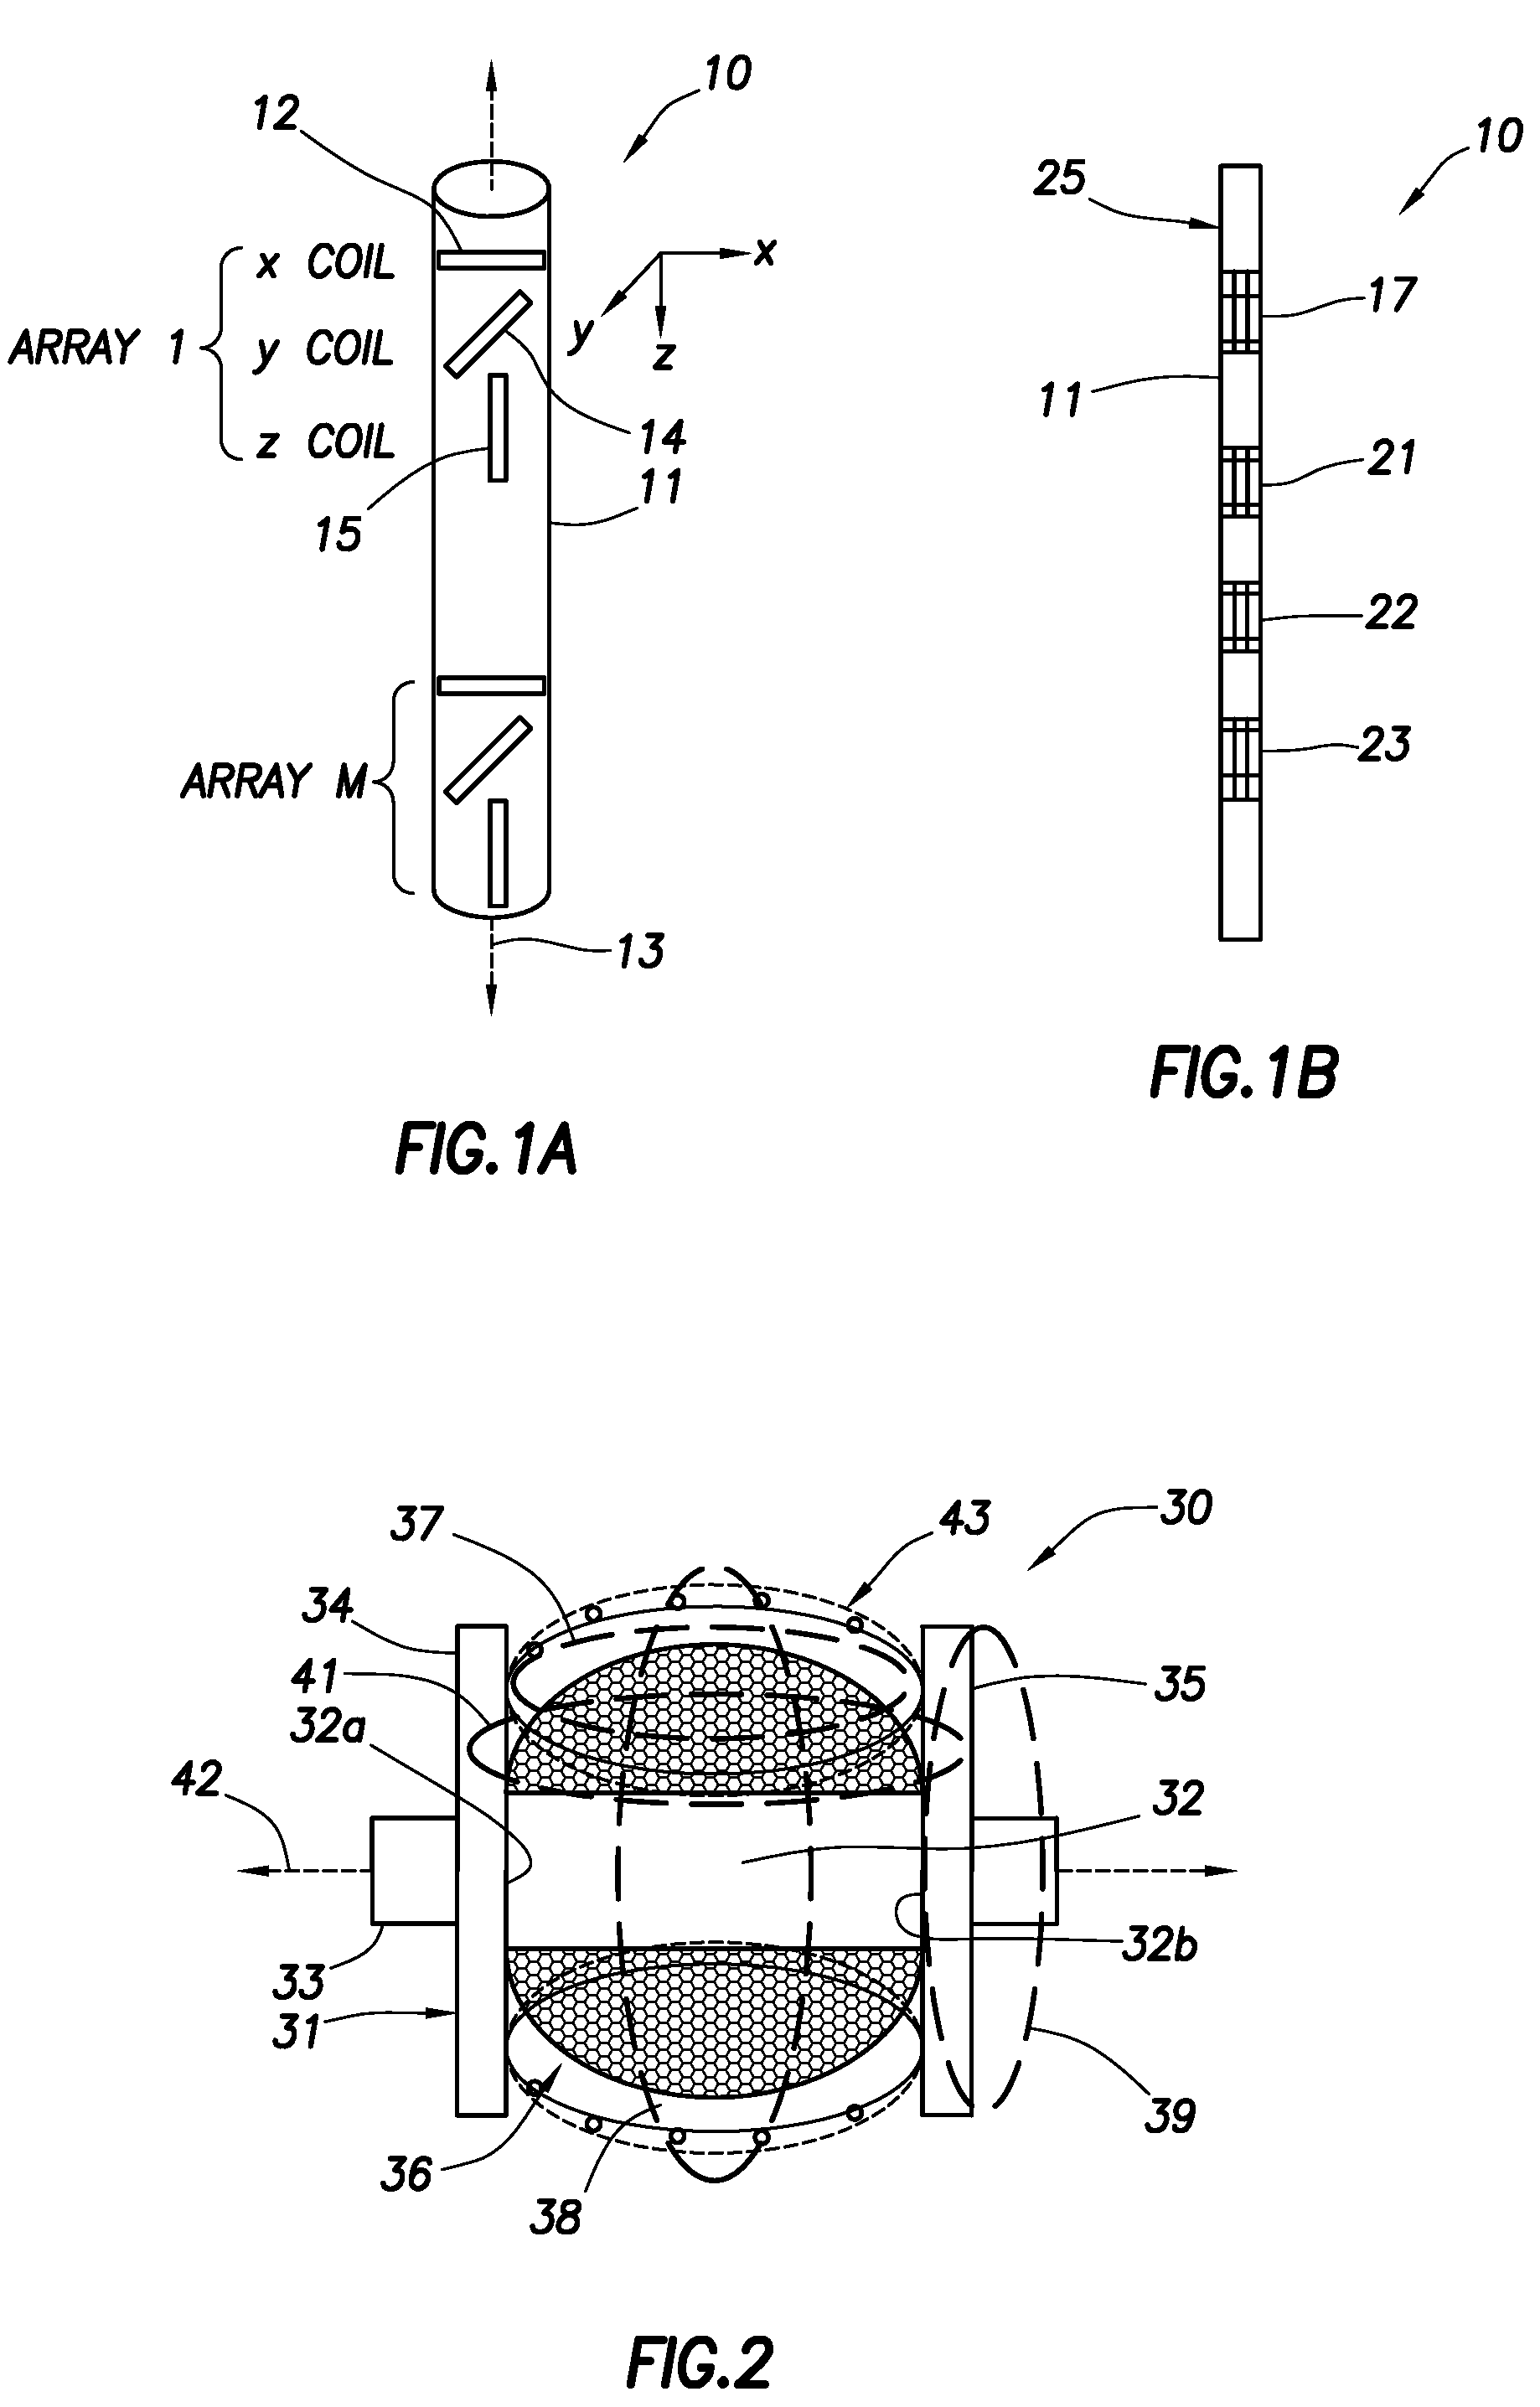 Antennas for deep induction array tools with increased sensitivities